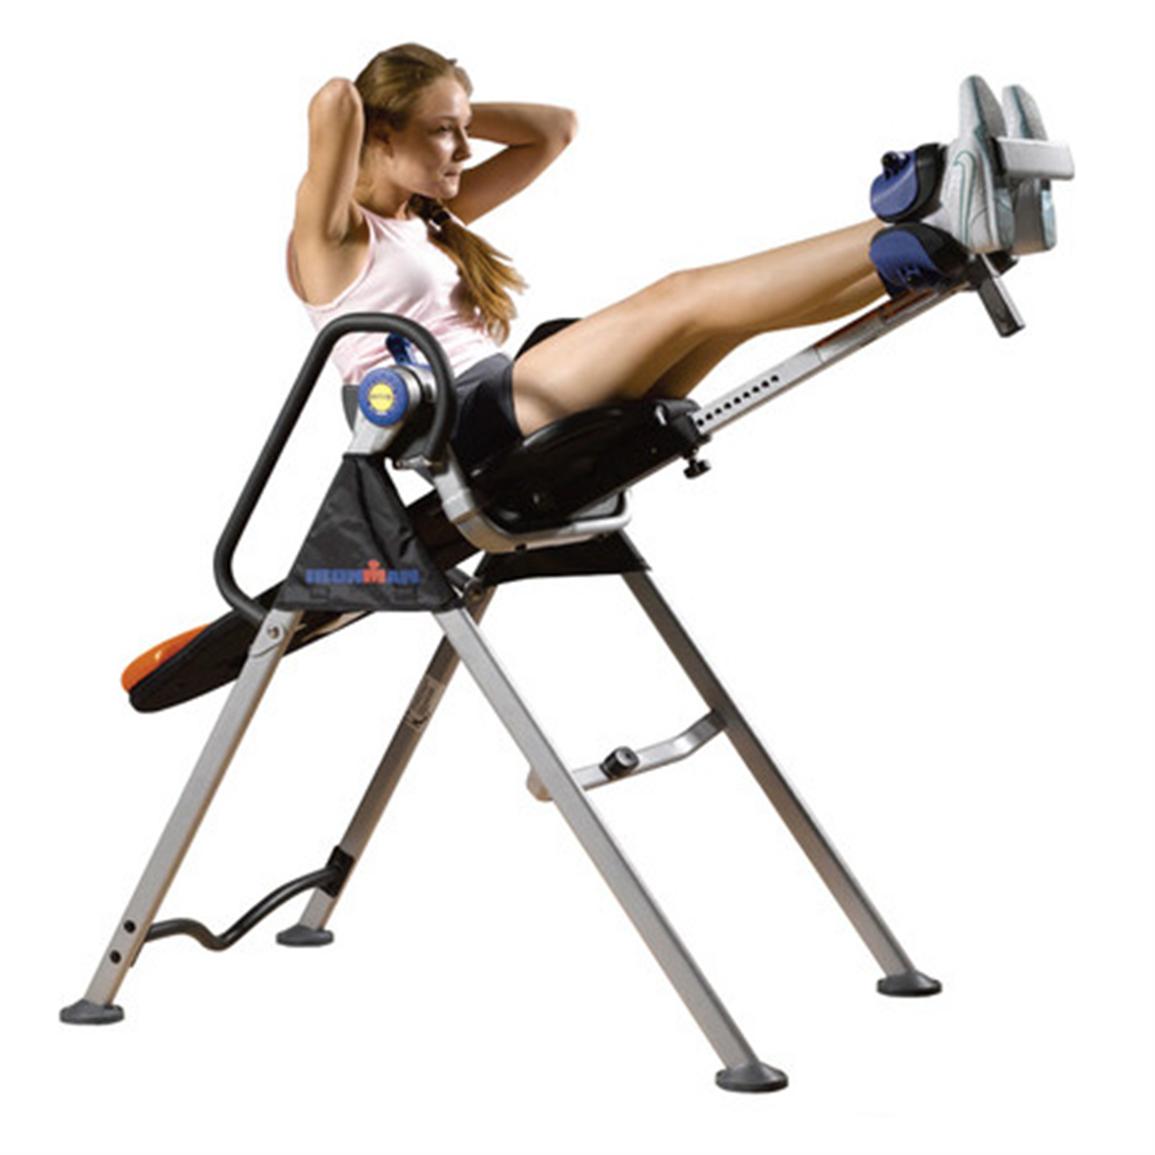 Ironman ATIS 1000 AB Training Table - 579511, Inversion Therapy at